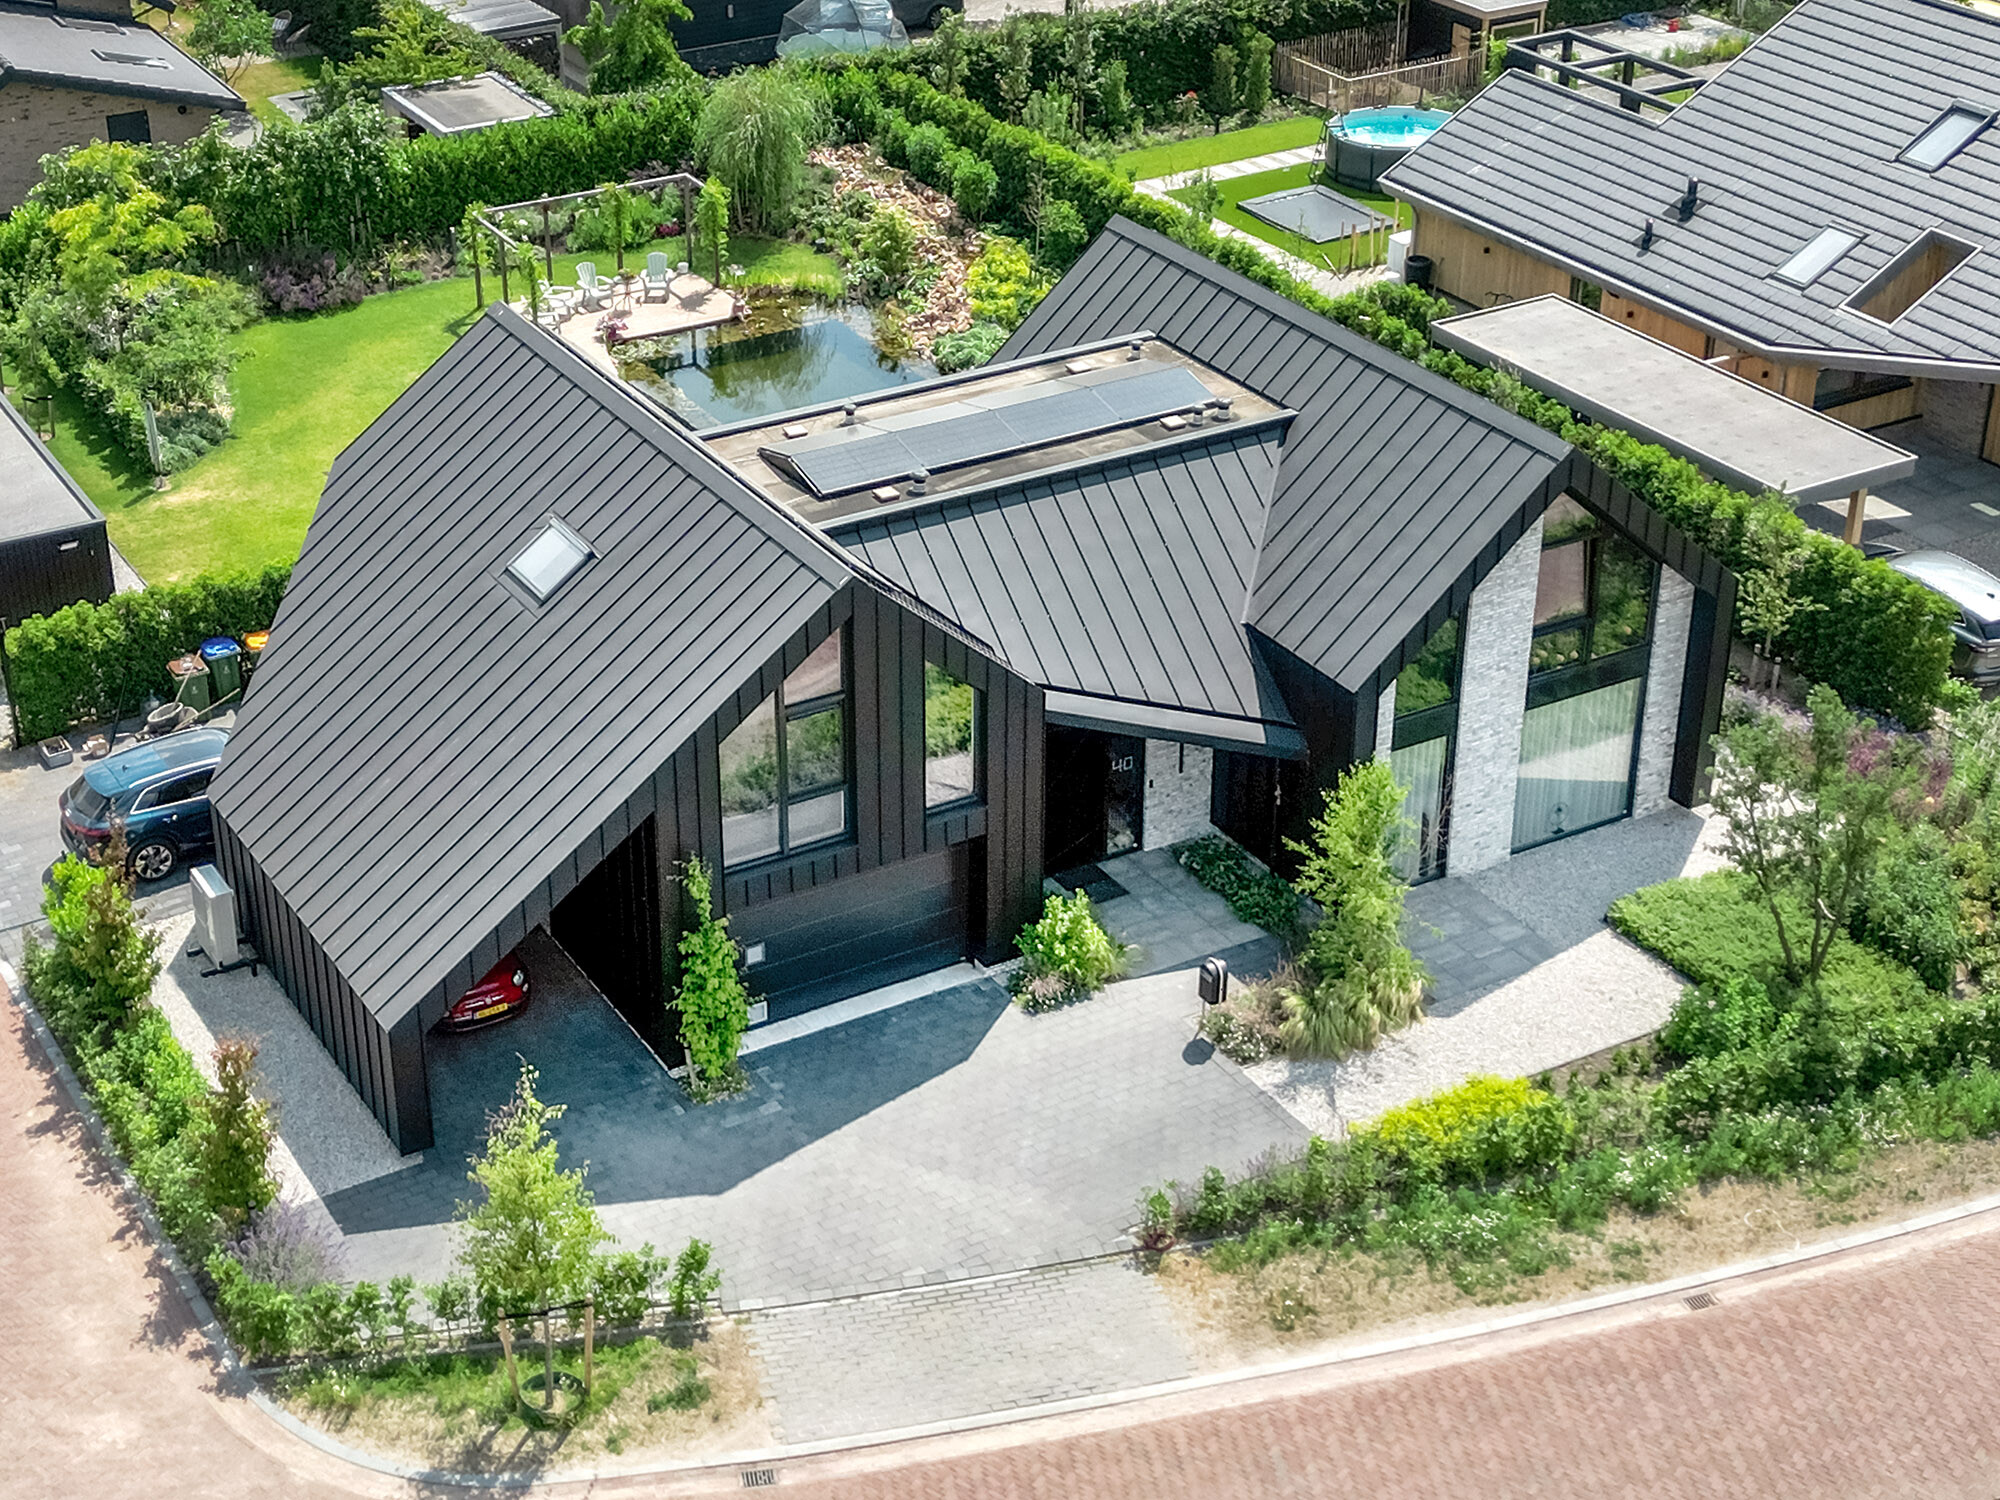 Aerial view of a modern detached house with a steep, black Prefalz pitched roof and integrated solar modules. The architecture combines large glass fronts and geometric shapes. A carport is integrated into the building. The property has a well-tended garden with a pond and terrace, surrounded by a quiet, suburban neighbourhood.